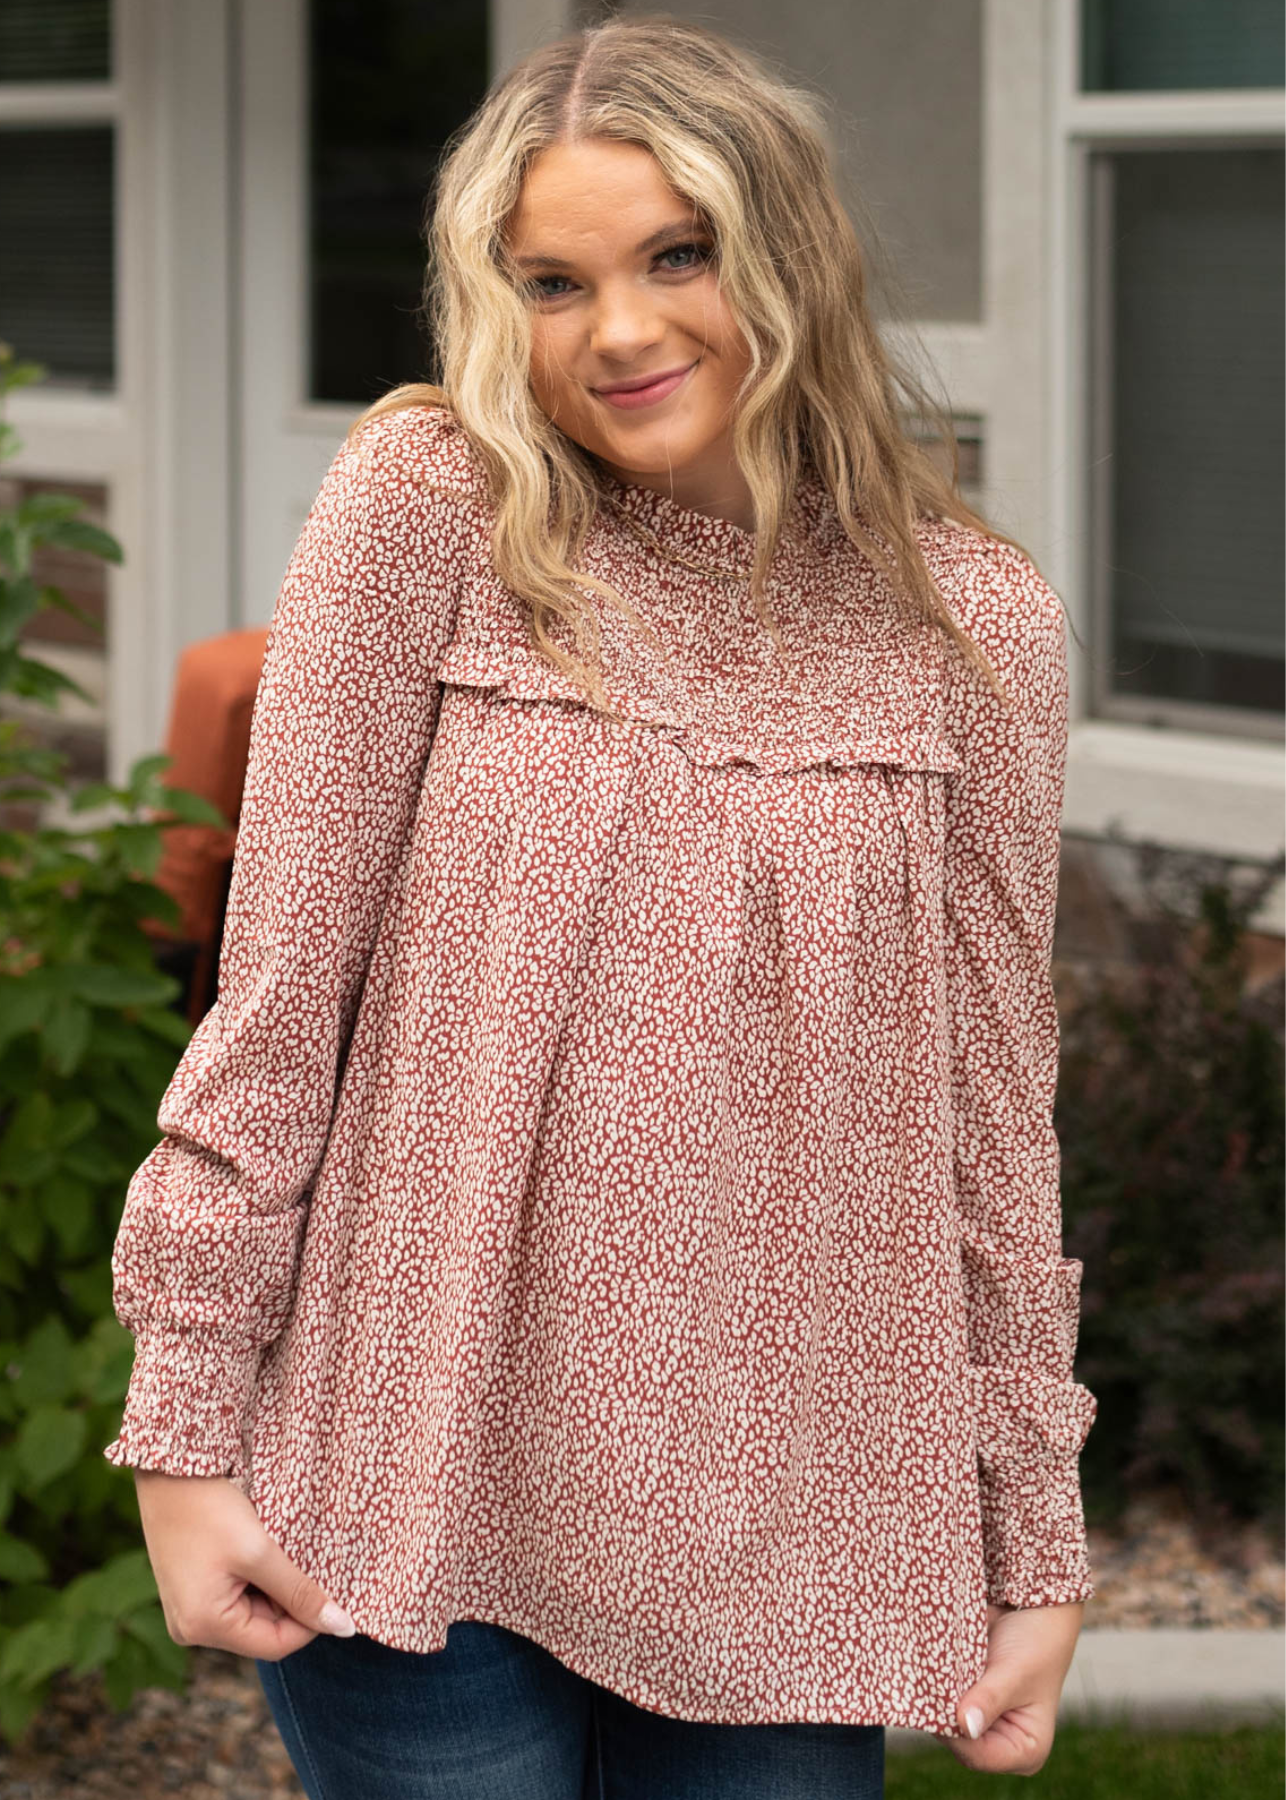 Brick cream print top with ruffle across the front